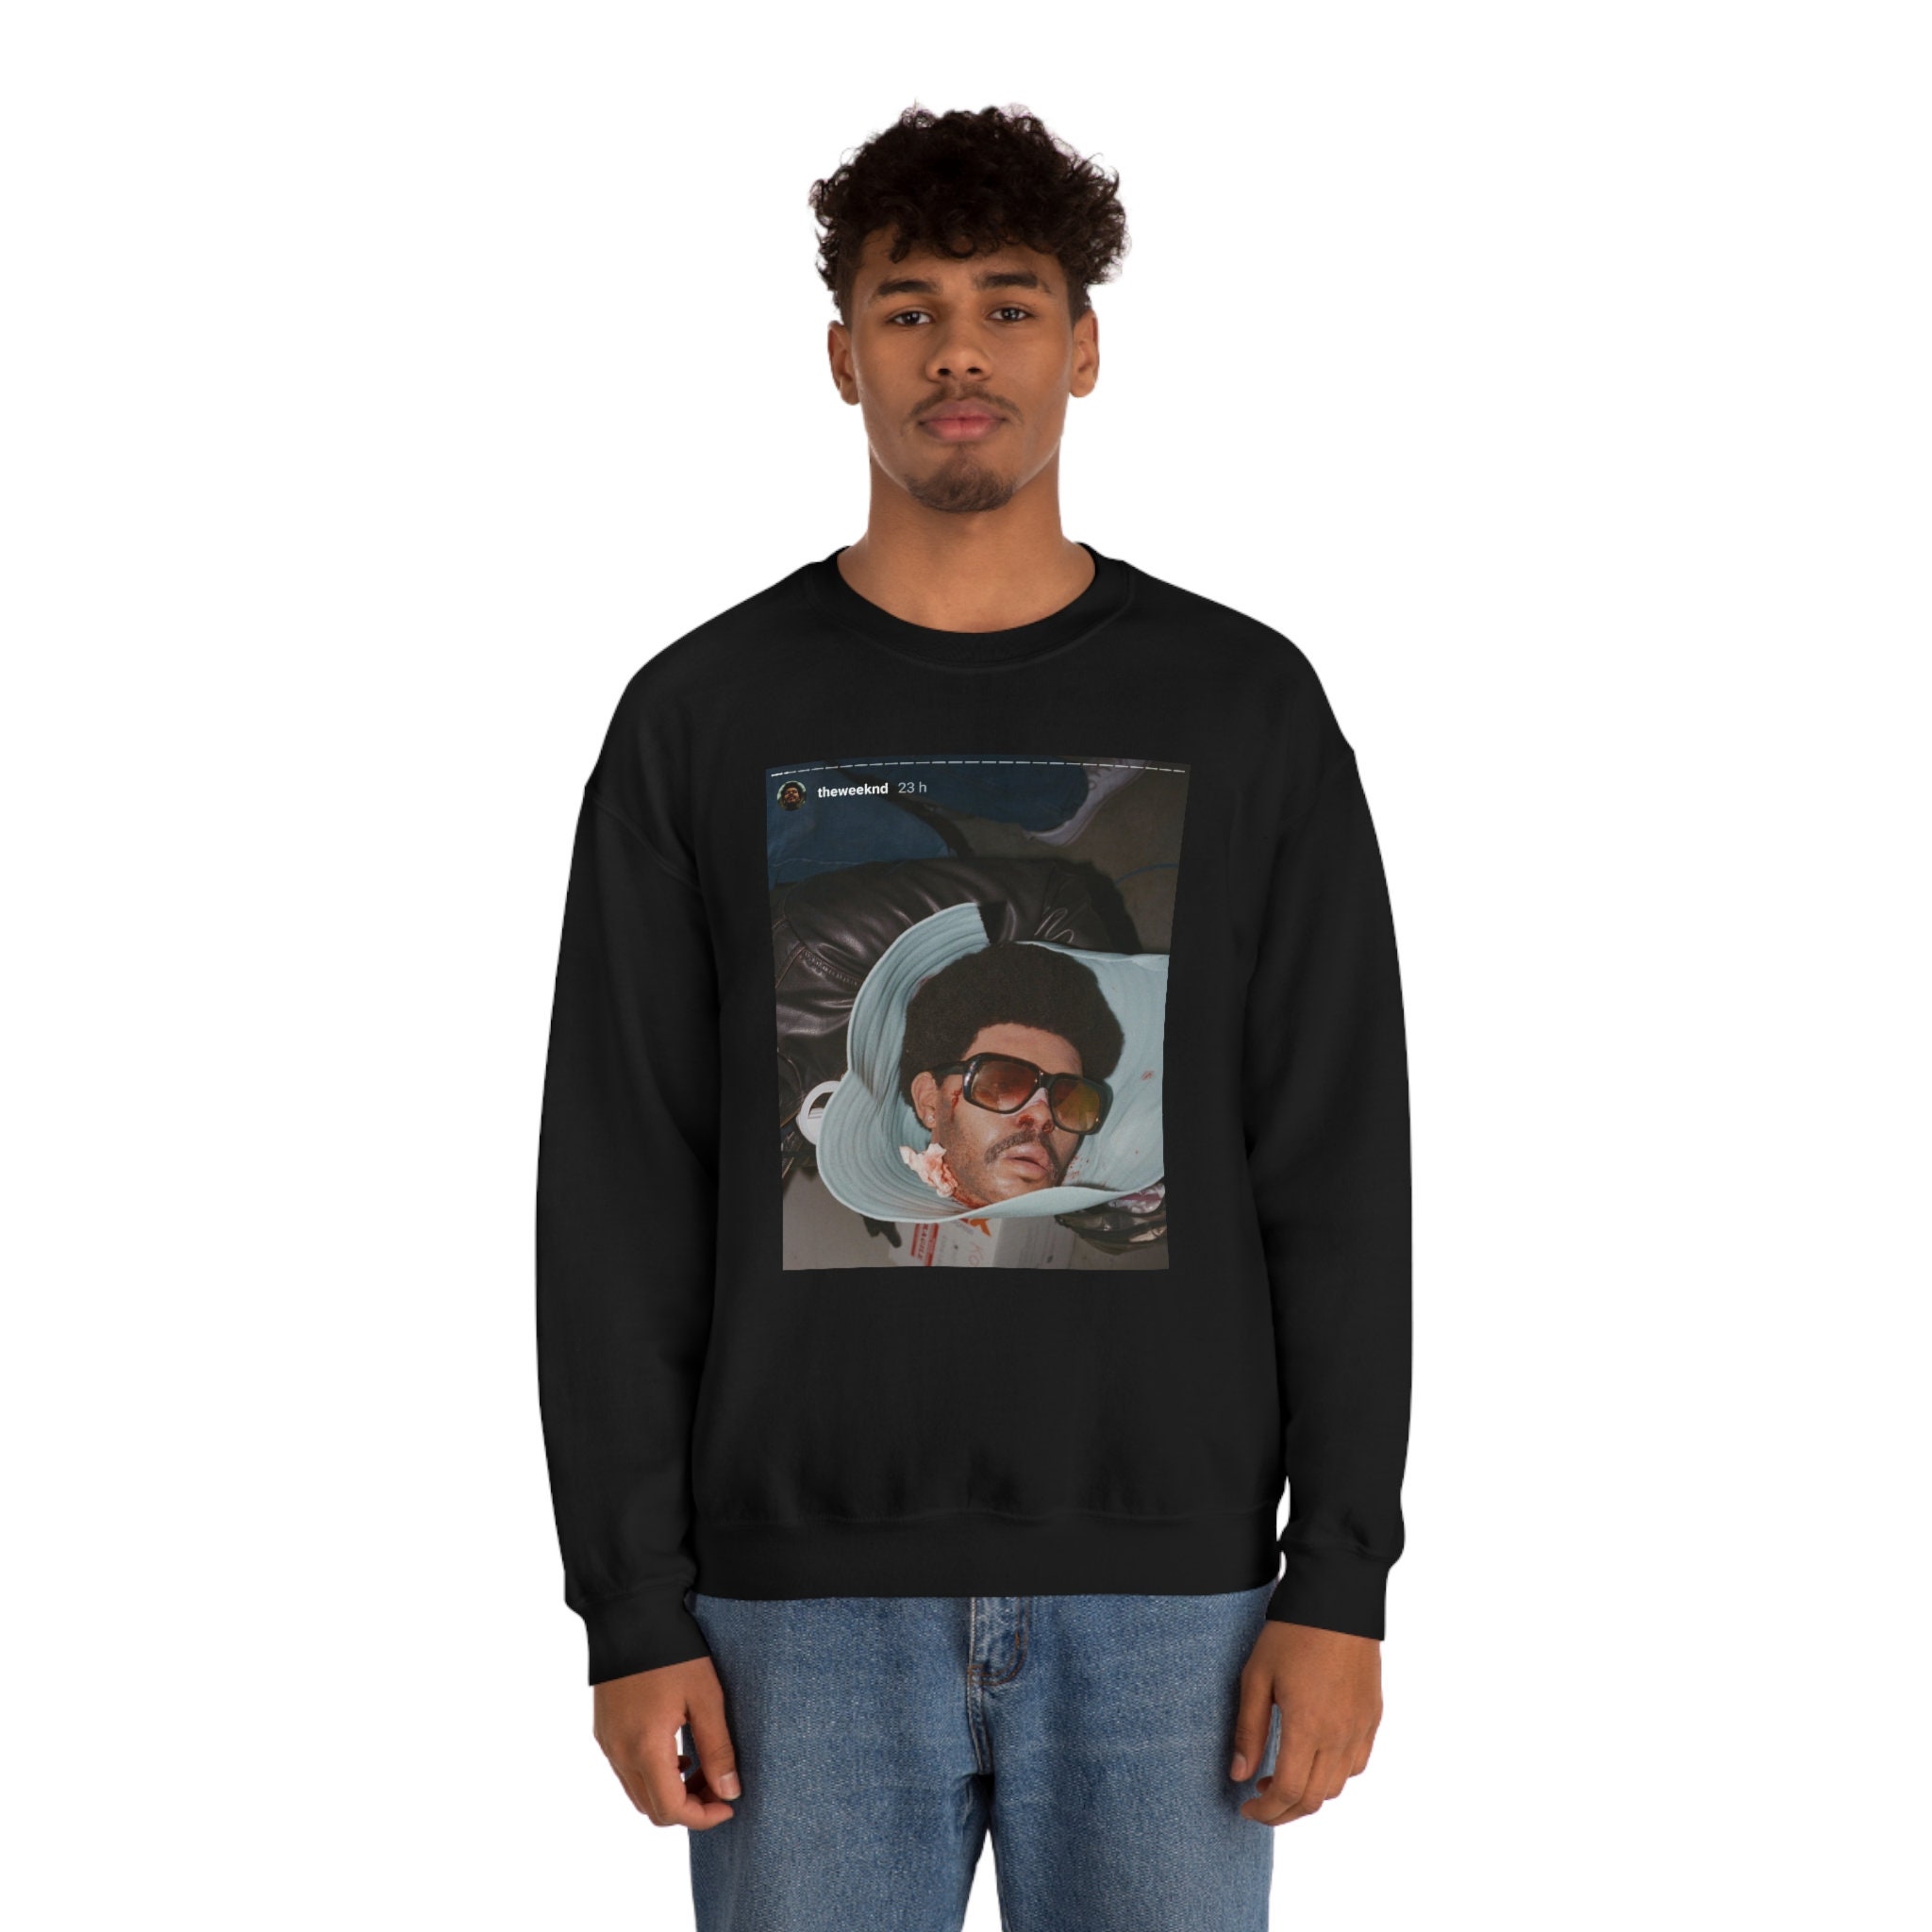 Discover The Weeknd Funny Vintage, The Weeknd Aesthetic Sweatshirt